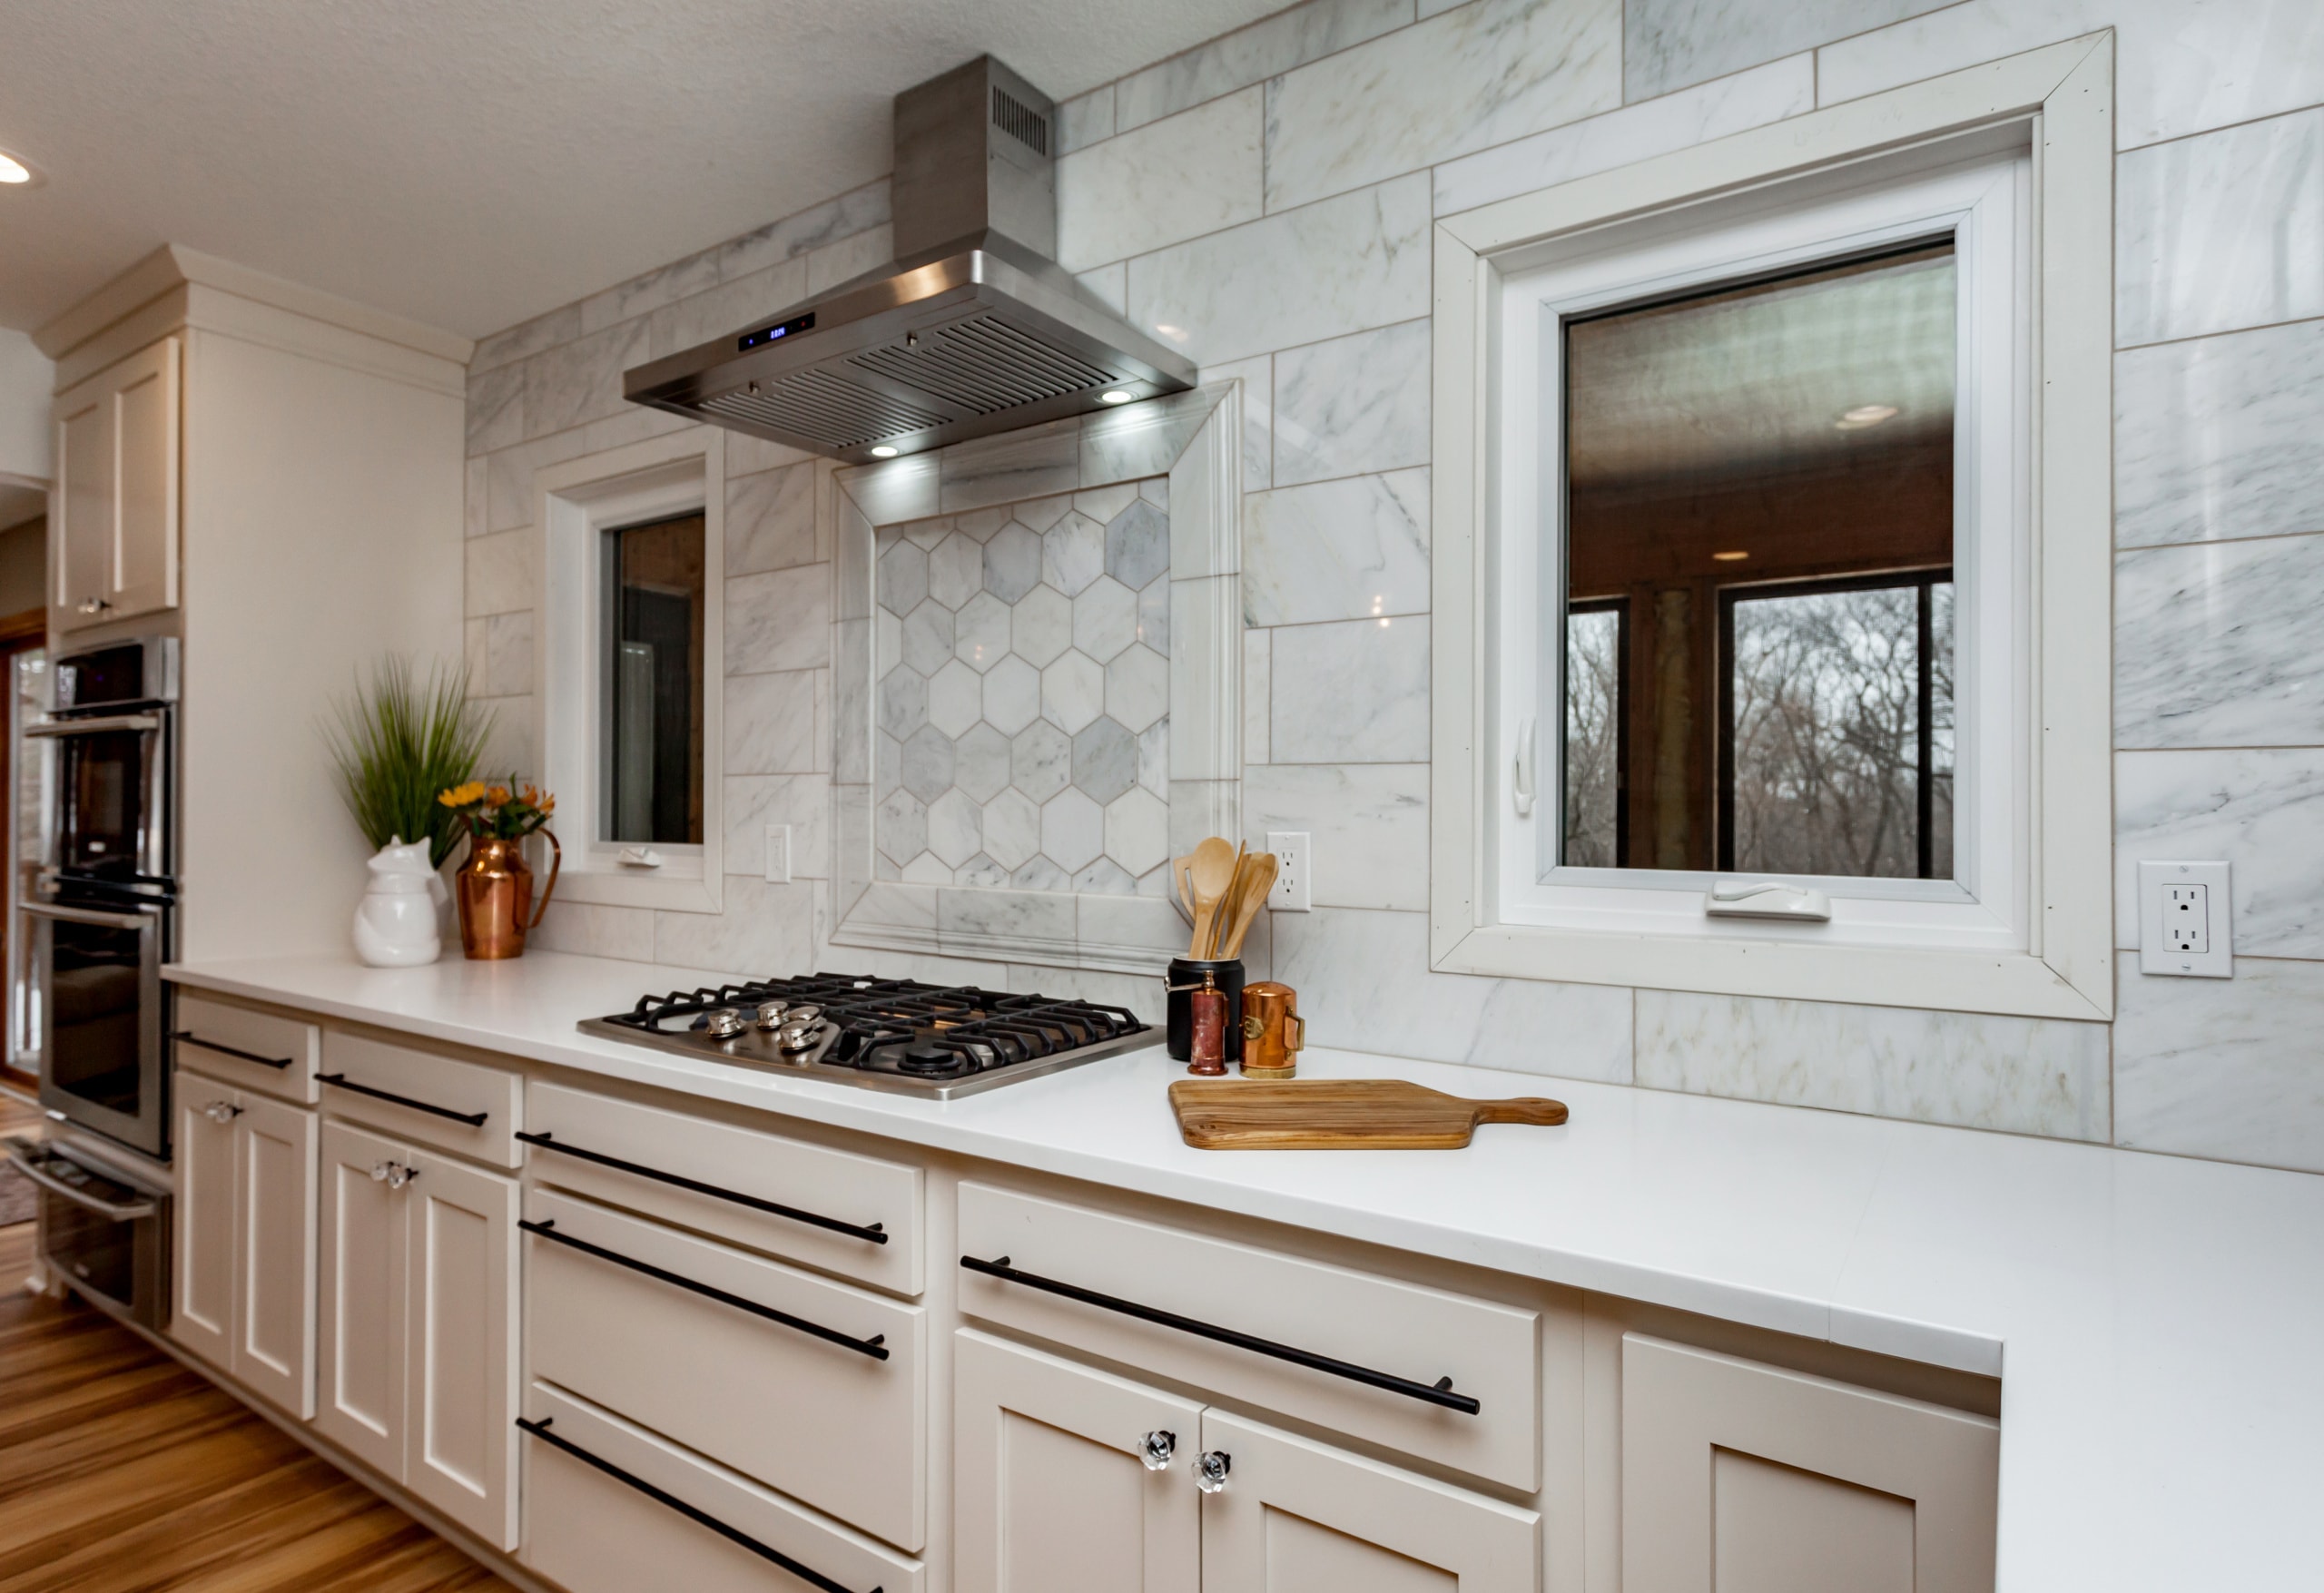 7 Things To Consider Before Remodeling The Kitchen (Guide)